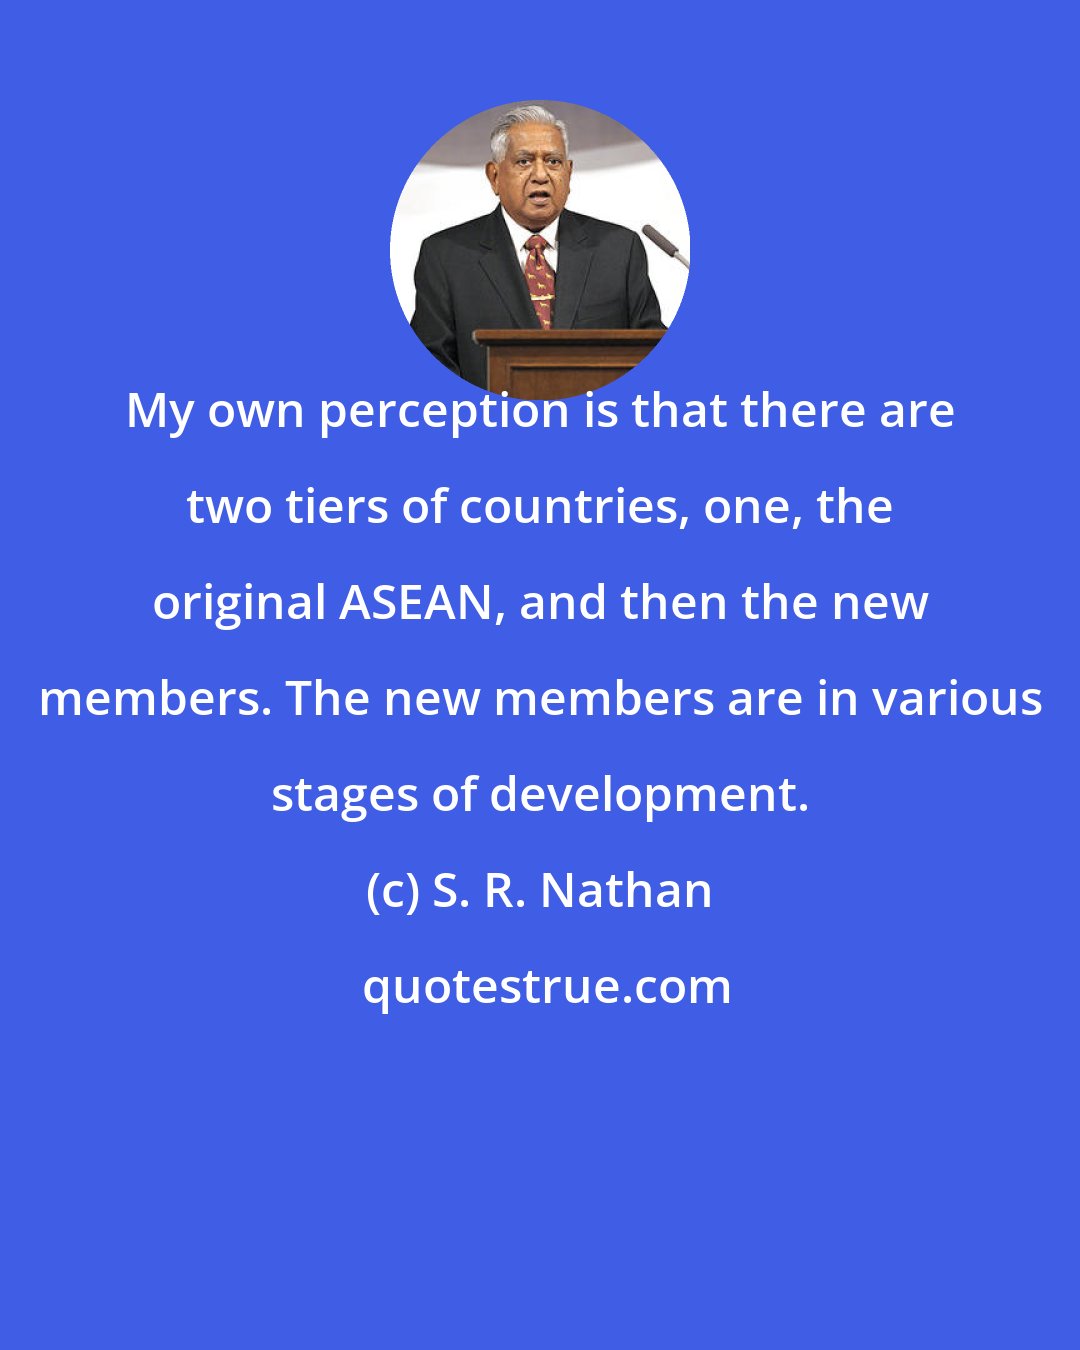 S. R. Nathan: My own perception is that there are two tiers of countries, one, the original ASEAN, and then the new members. The new members are in various stages of development.